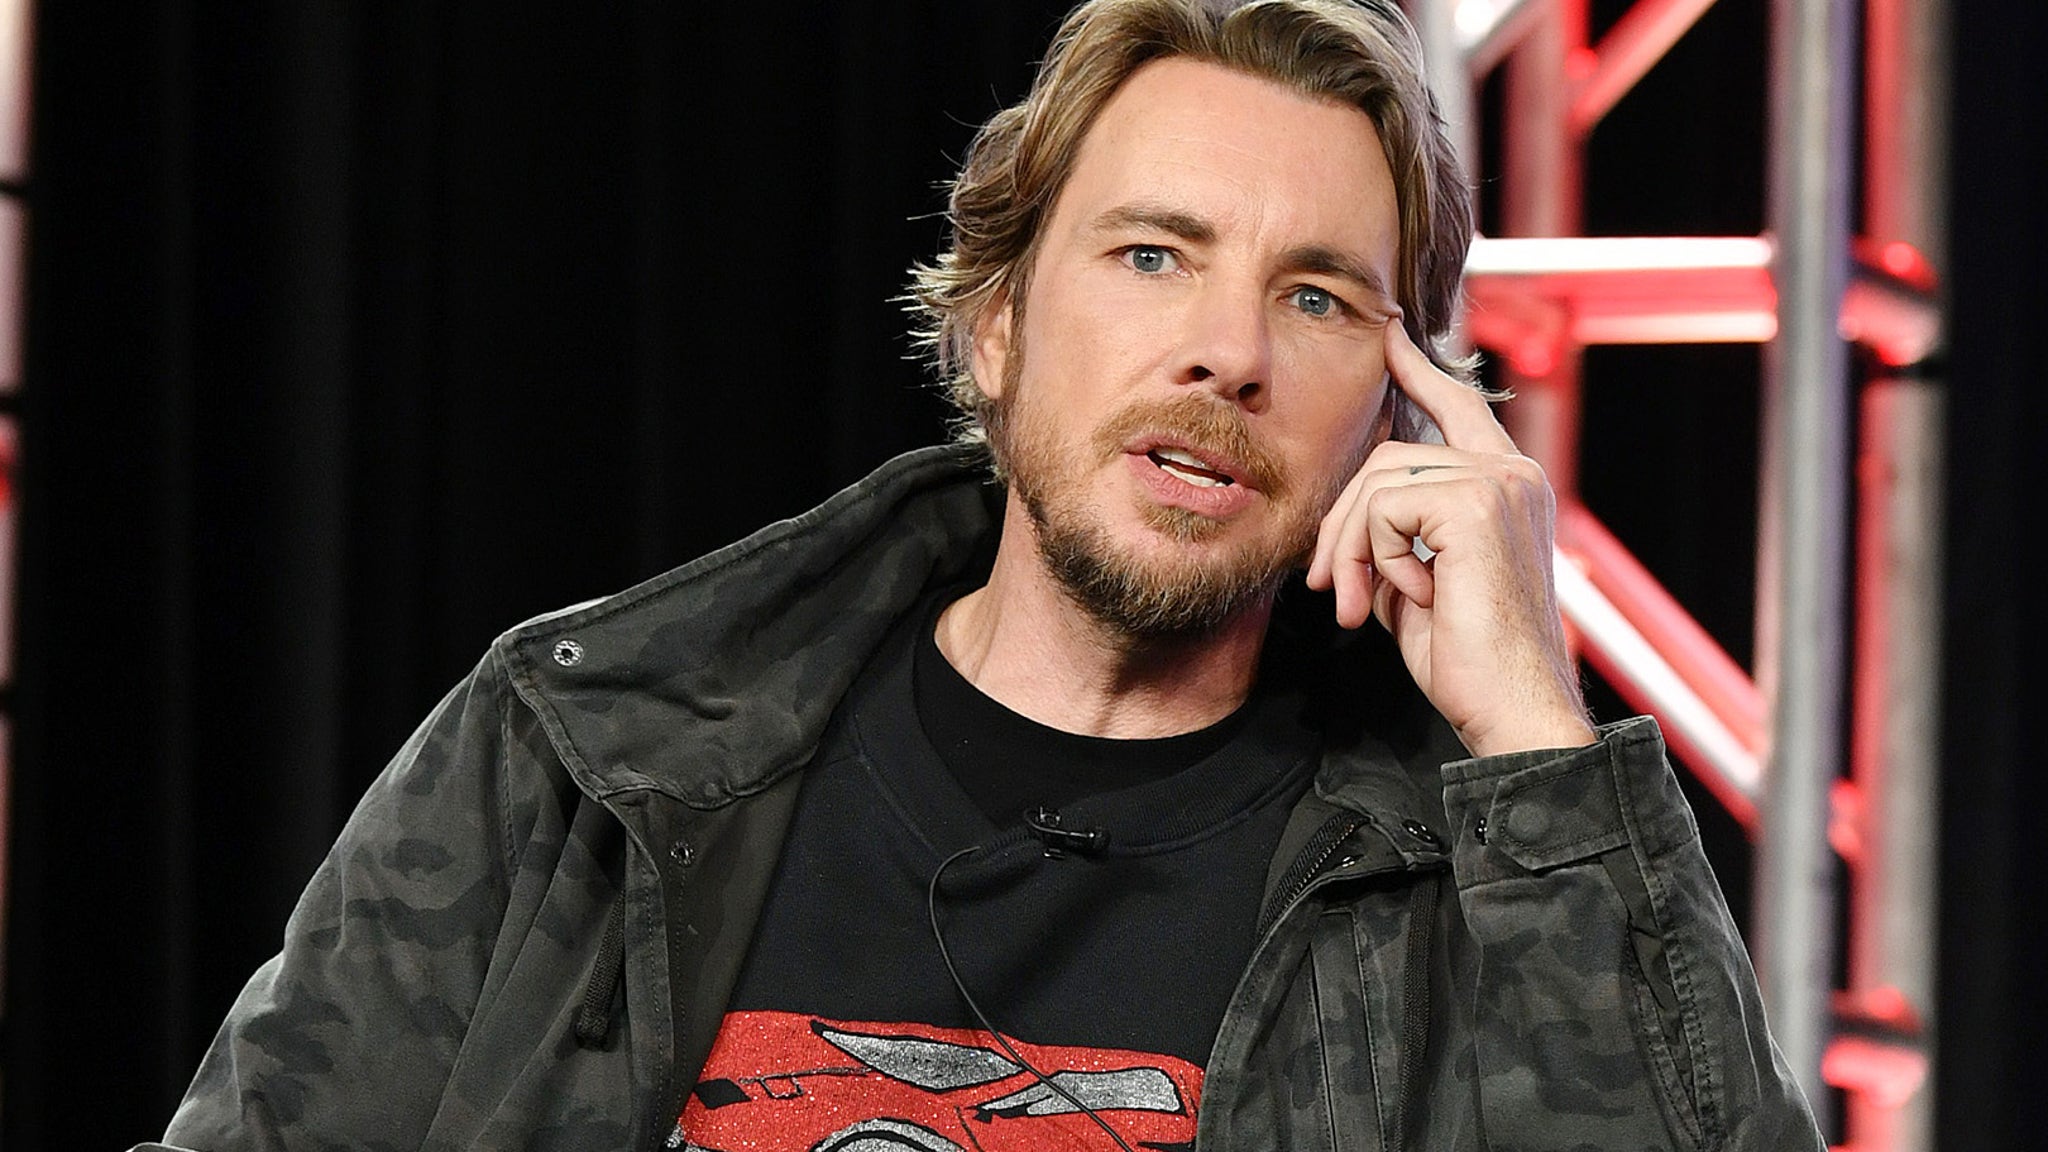 Dax Shepard Pushes Back Against Guest Who Says He Fat-Shamed His Audience